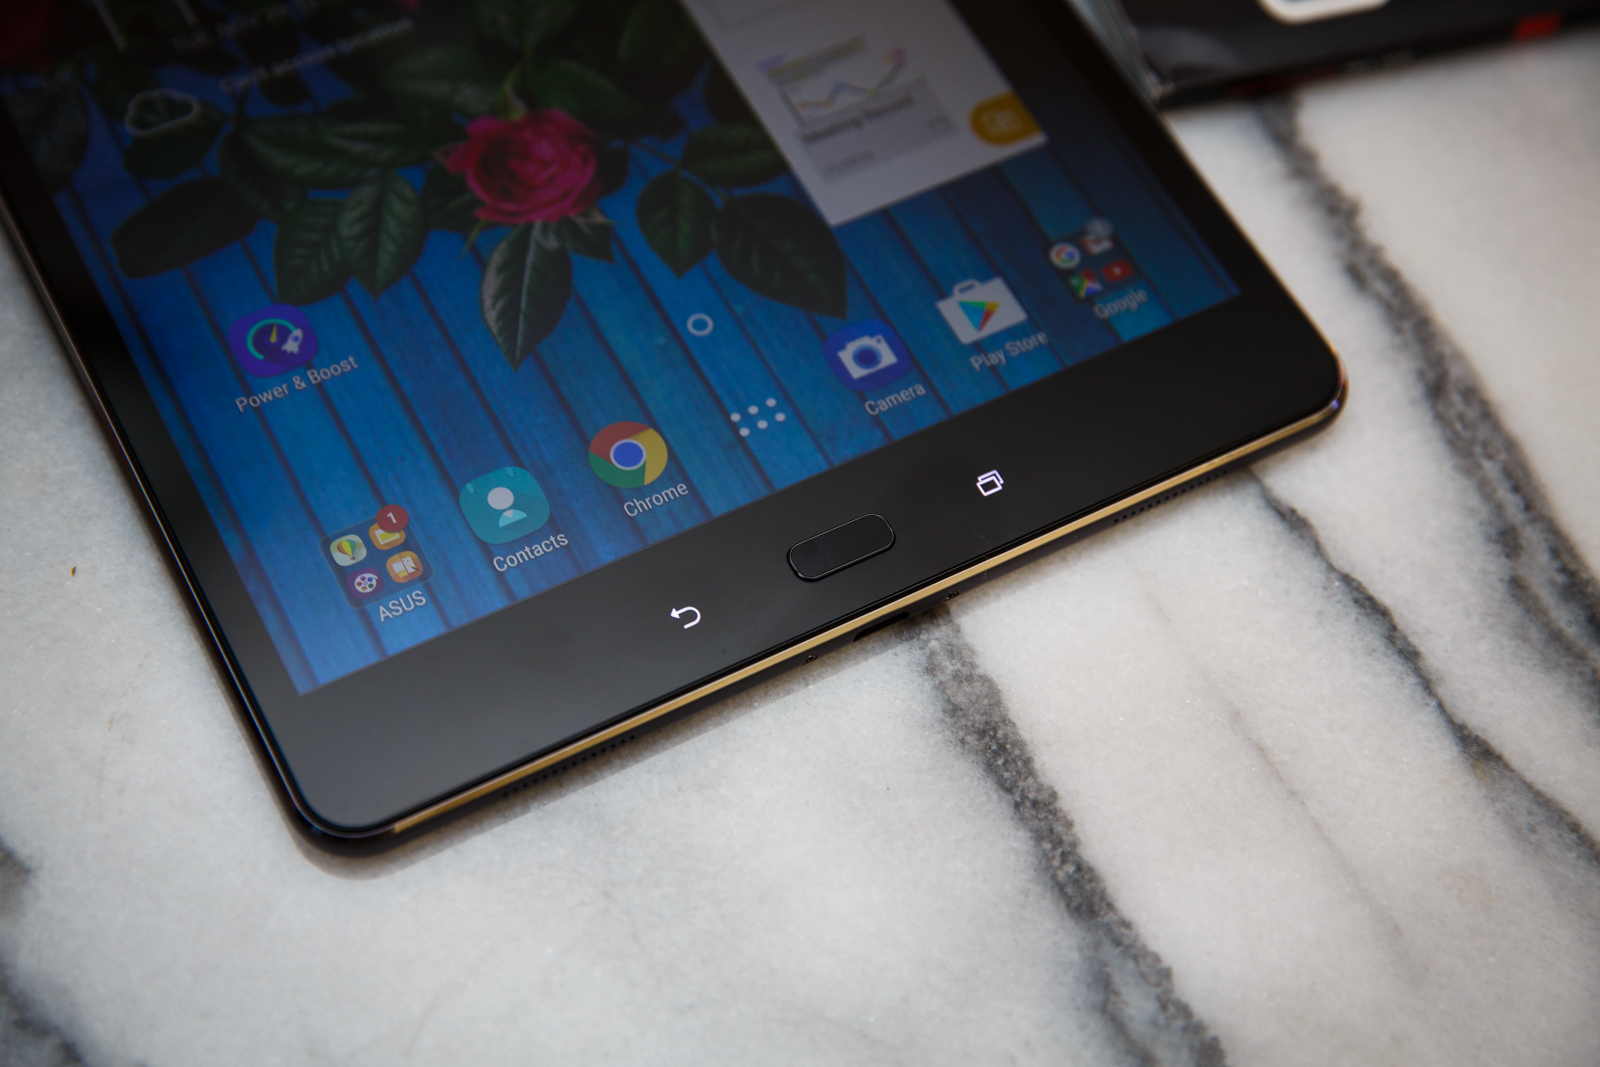 Asus ZenPad 3S 10 review: Twice the storage as the iPad Air 2 and 